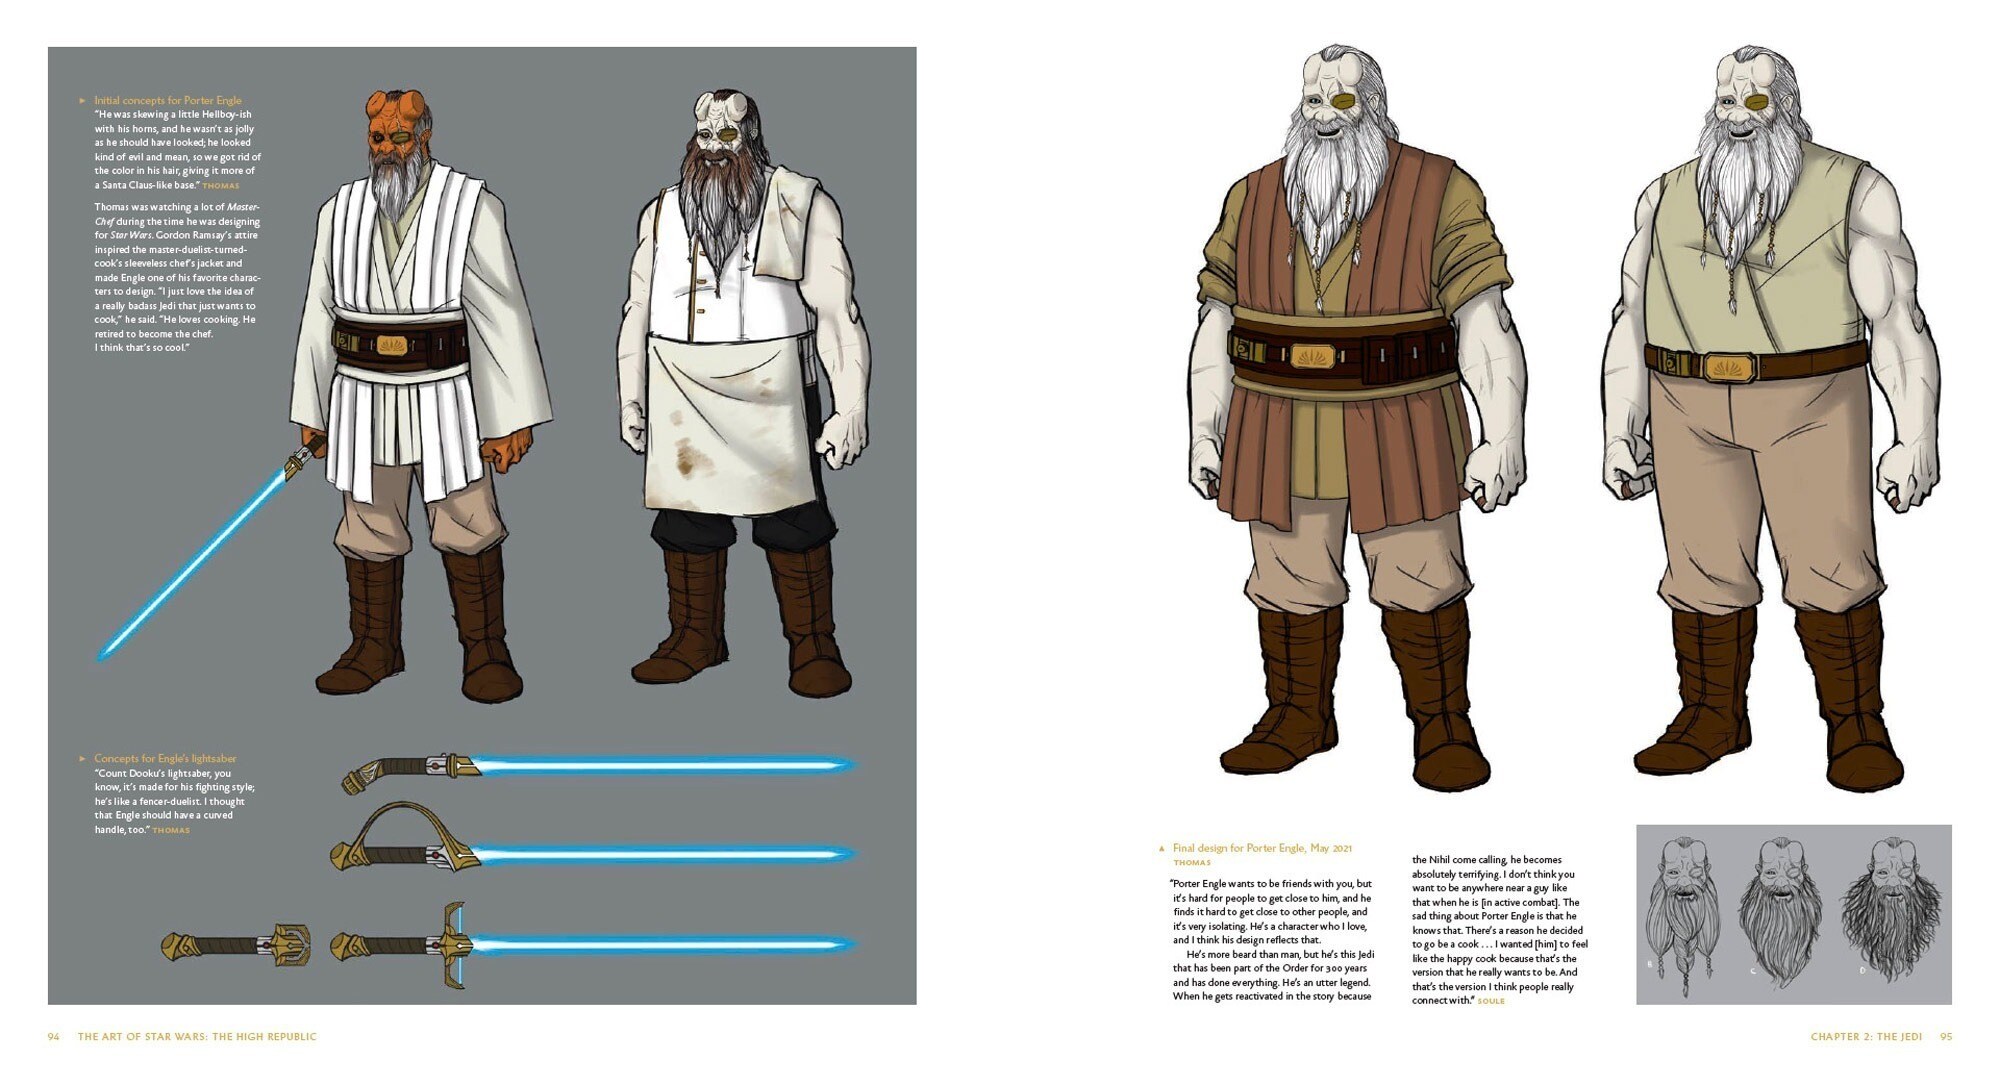 The Art of Star Wars: The High Republic: The Art of Porter excerpt